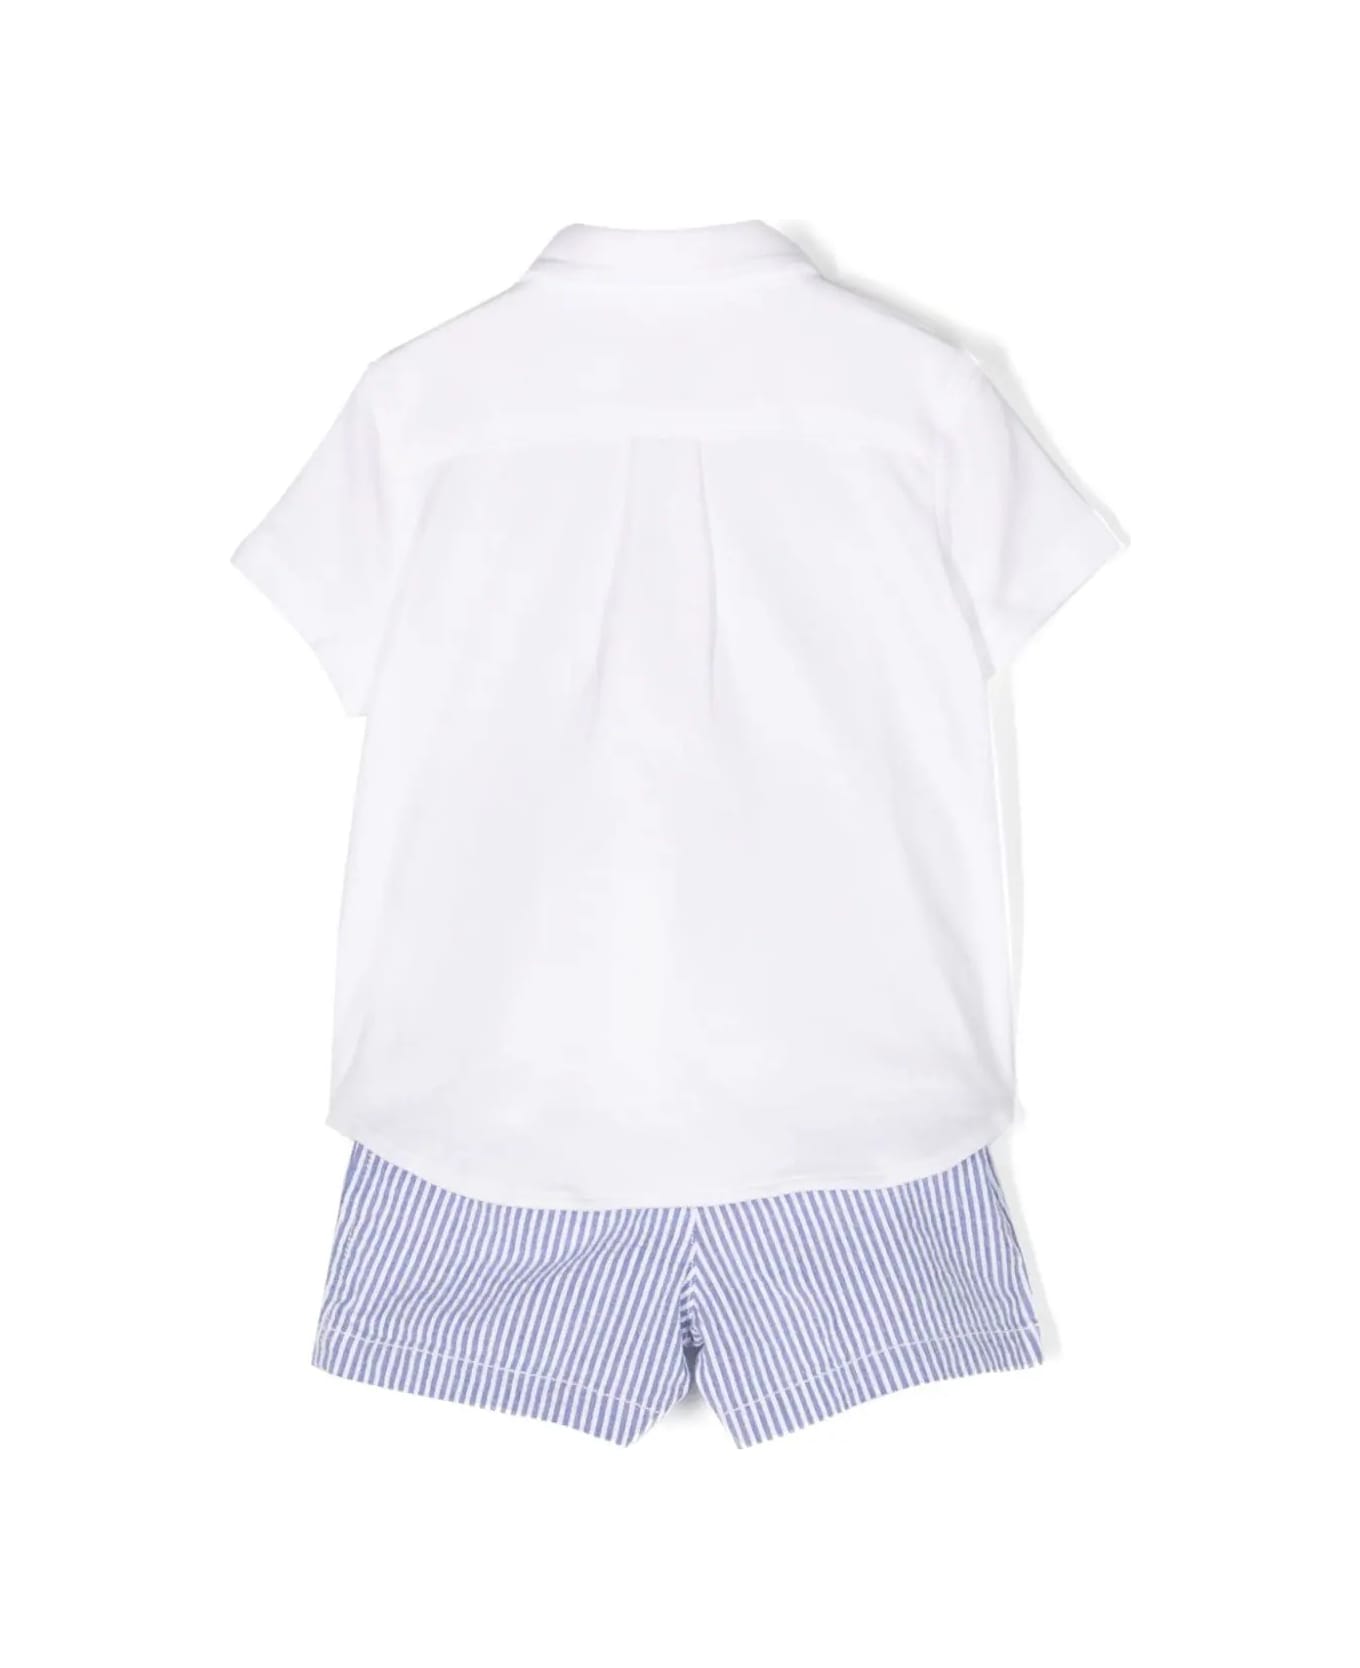 Ralph Lauren White And Light Blue Set With Shirt And Shorts - White ボディスーツ＆セットアップ